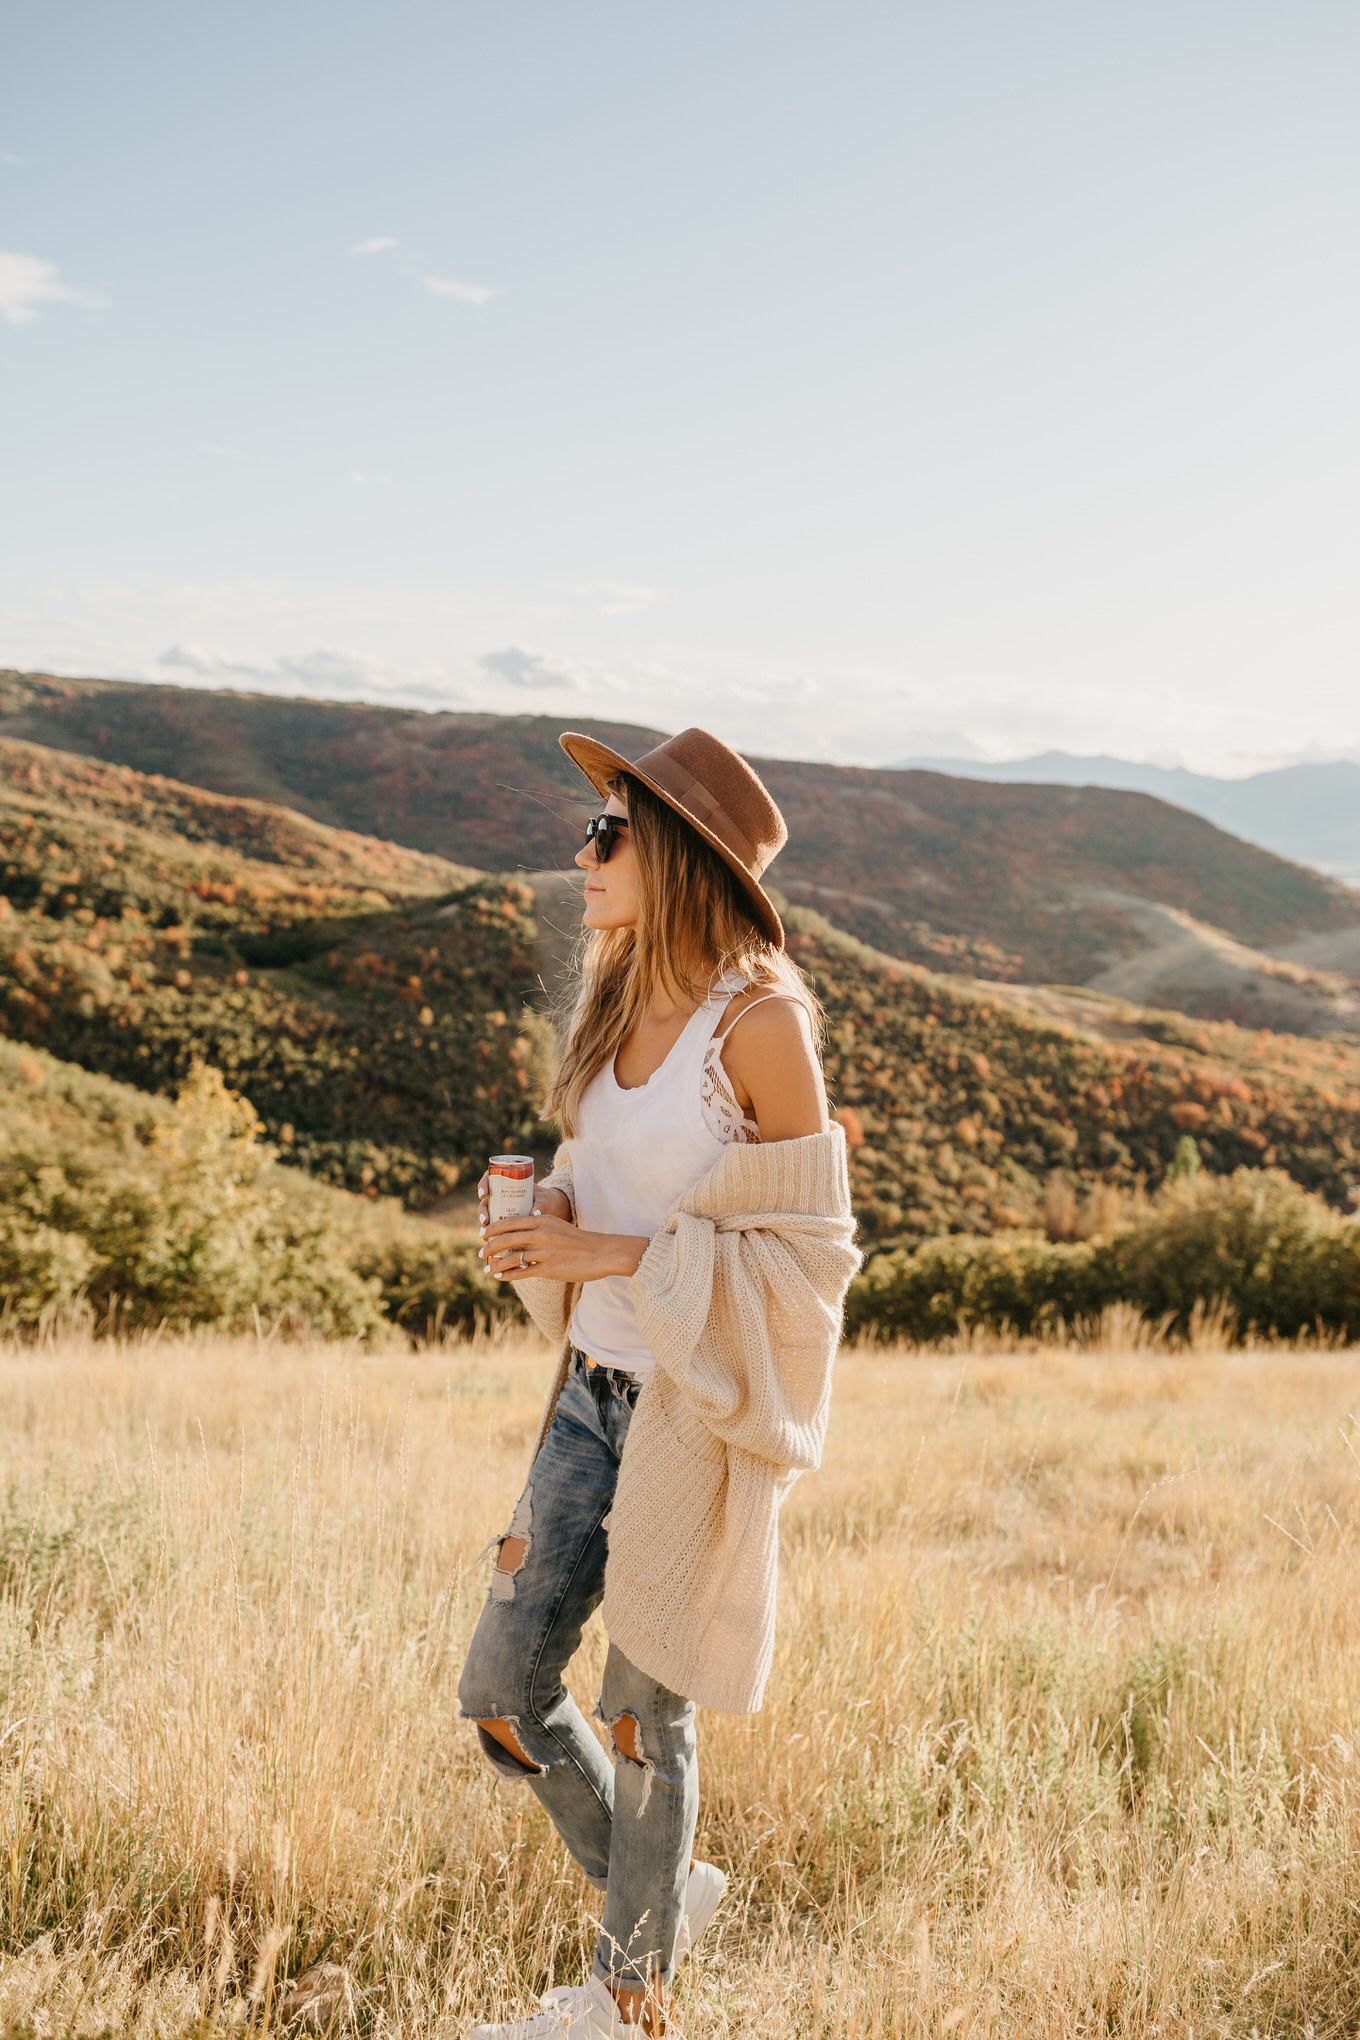 5 Outdoor Date Ideas To Try This Fall | Hello Fashion